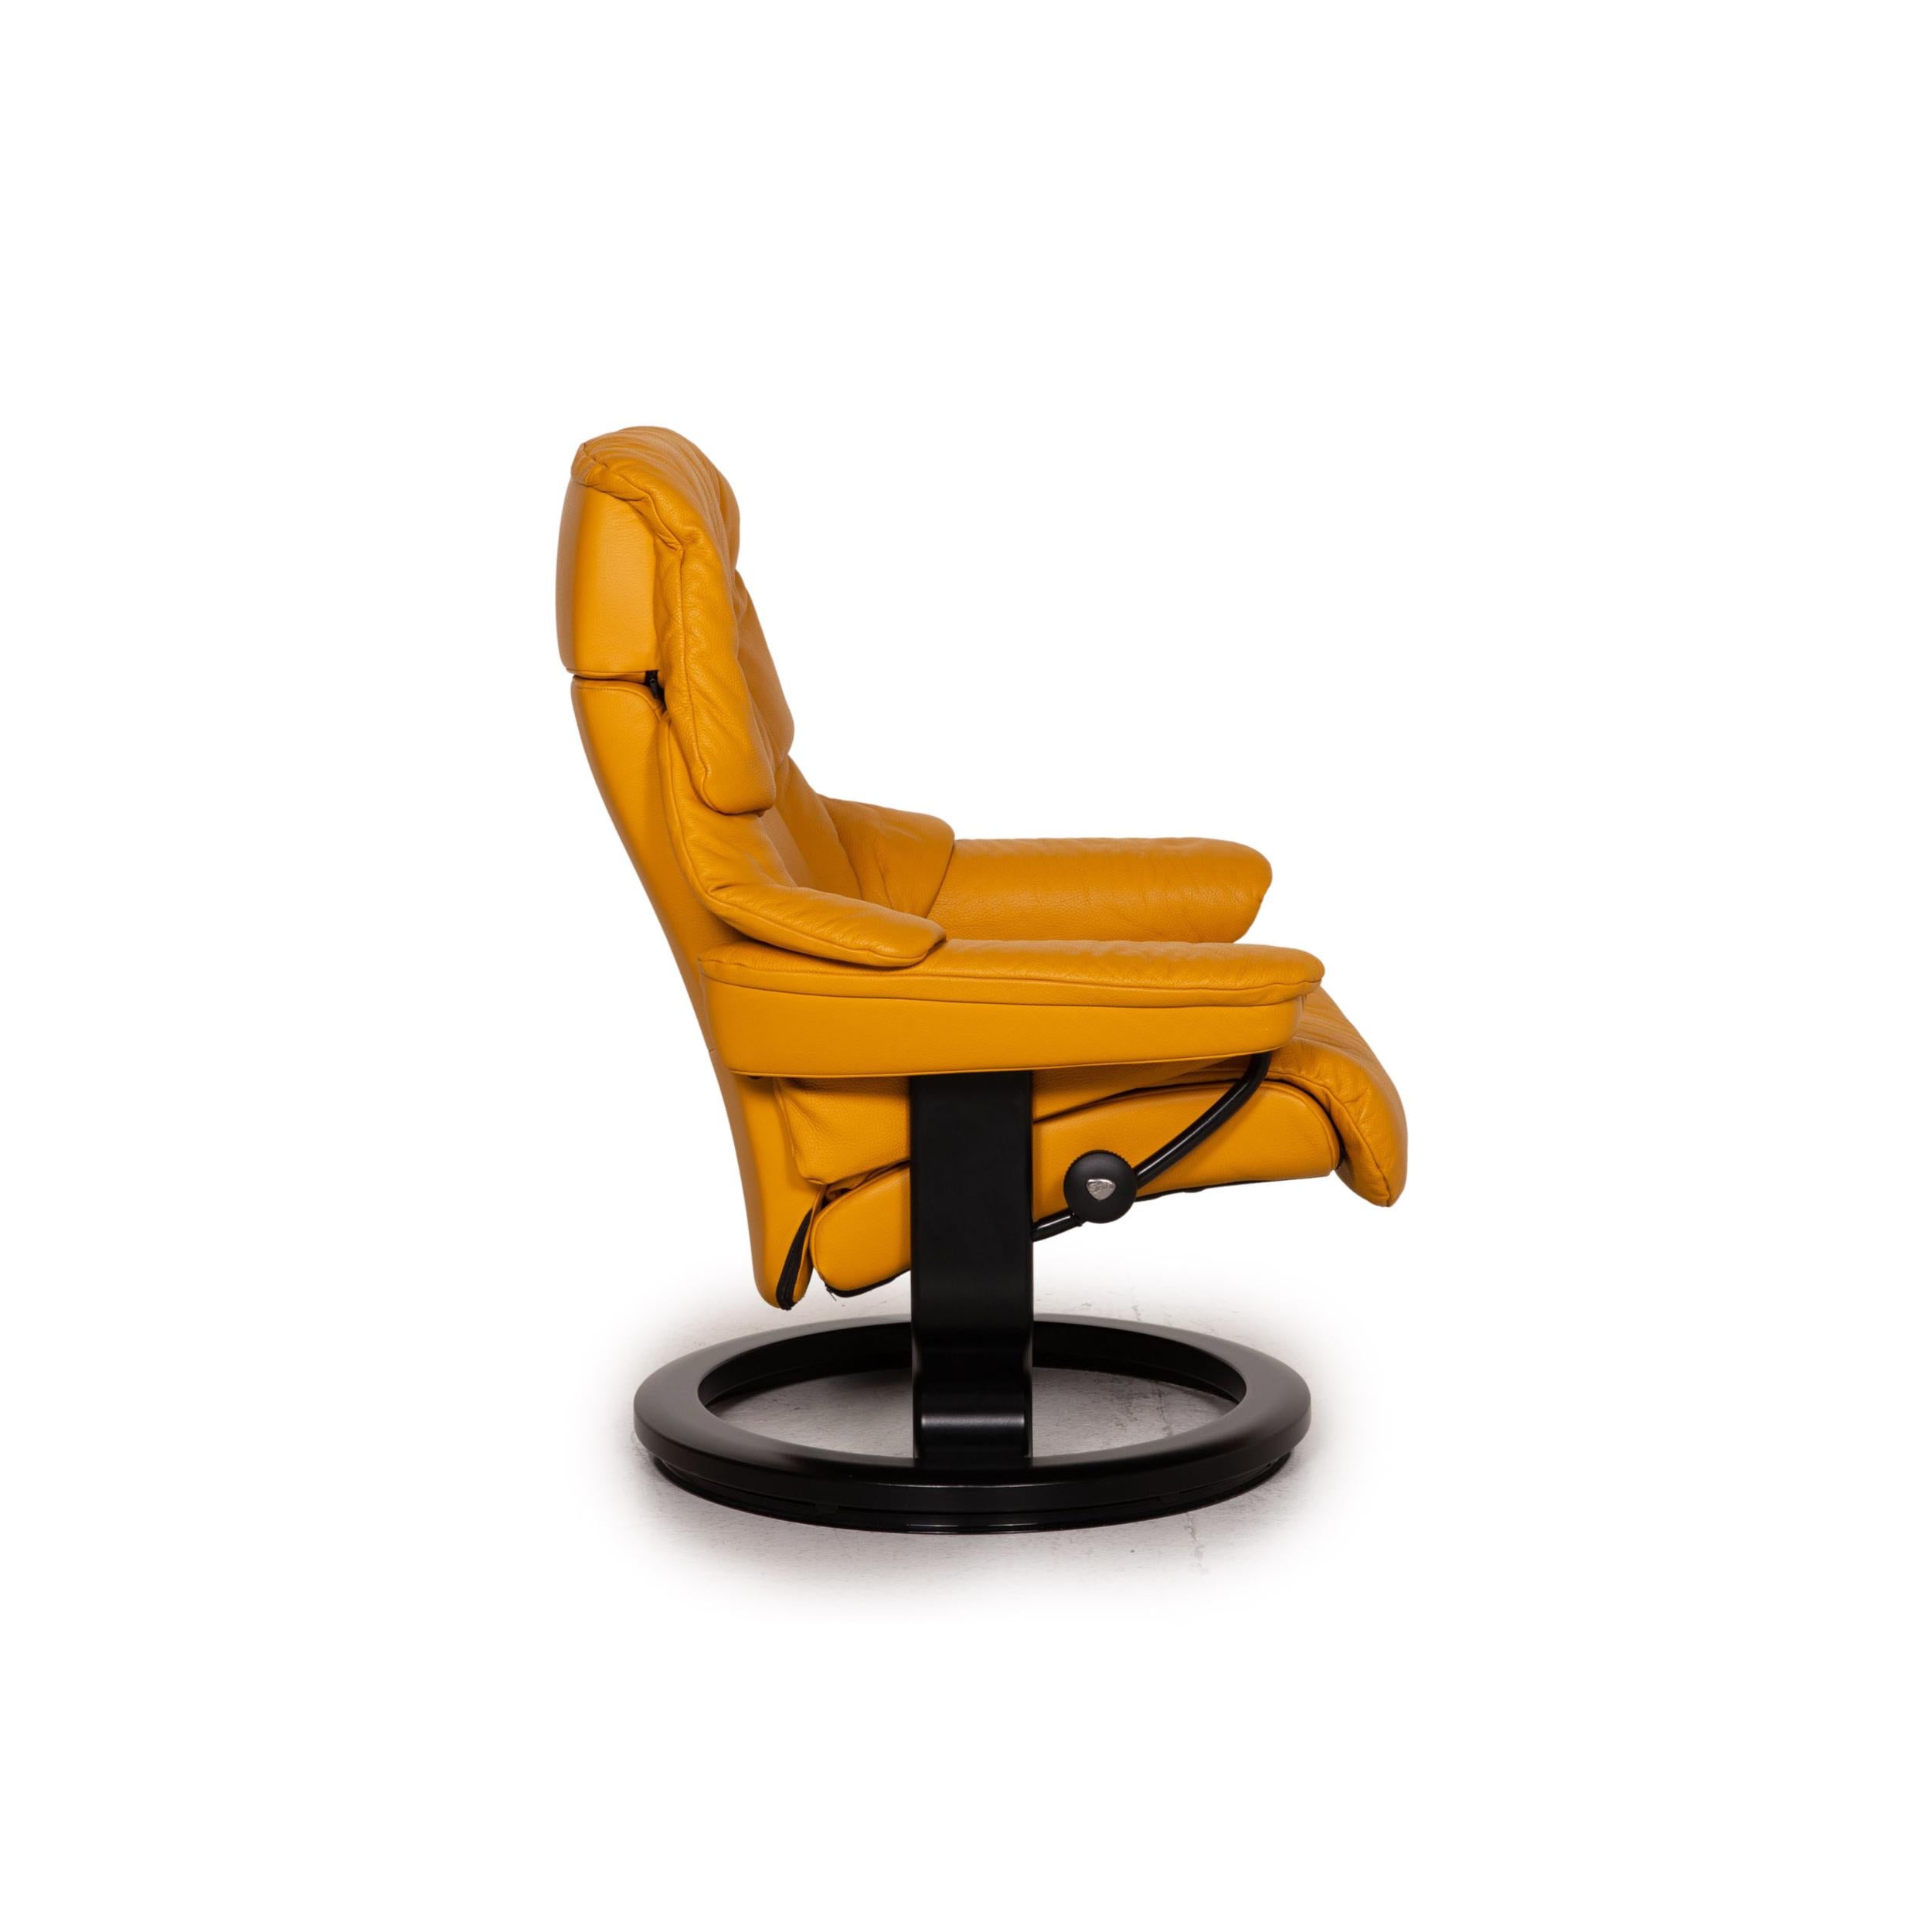 Stressless Reno Leather Recliner Yellow Armchair 2